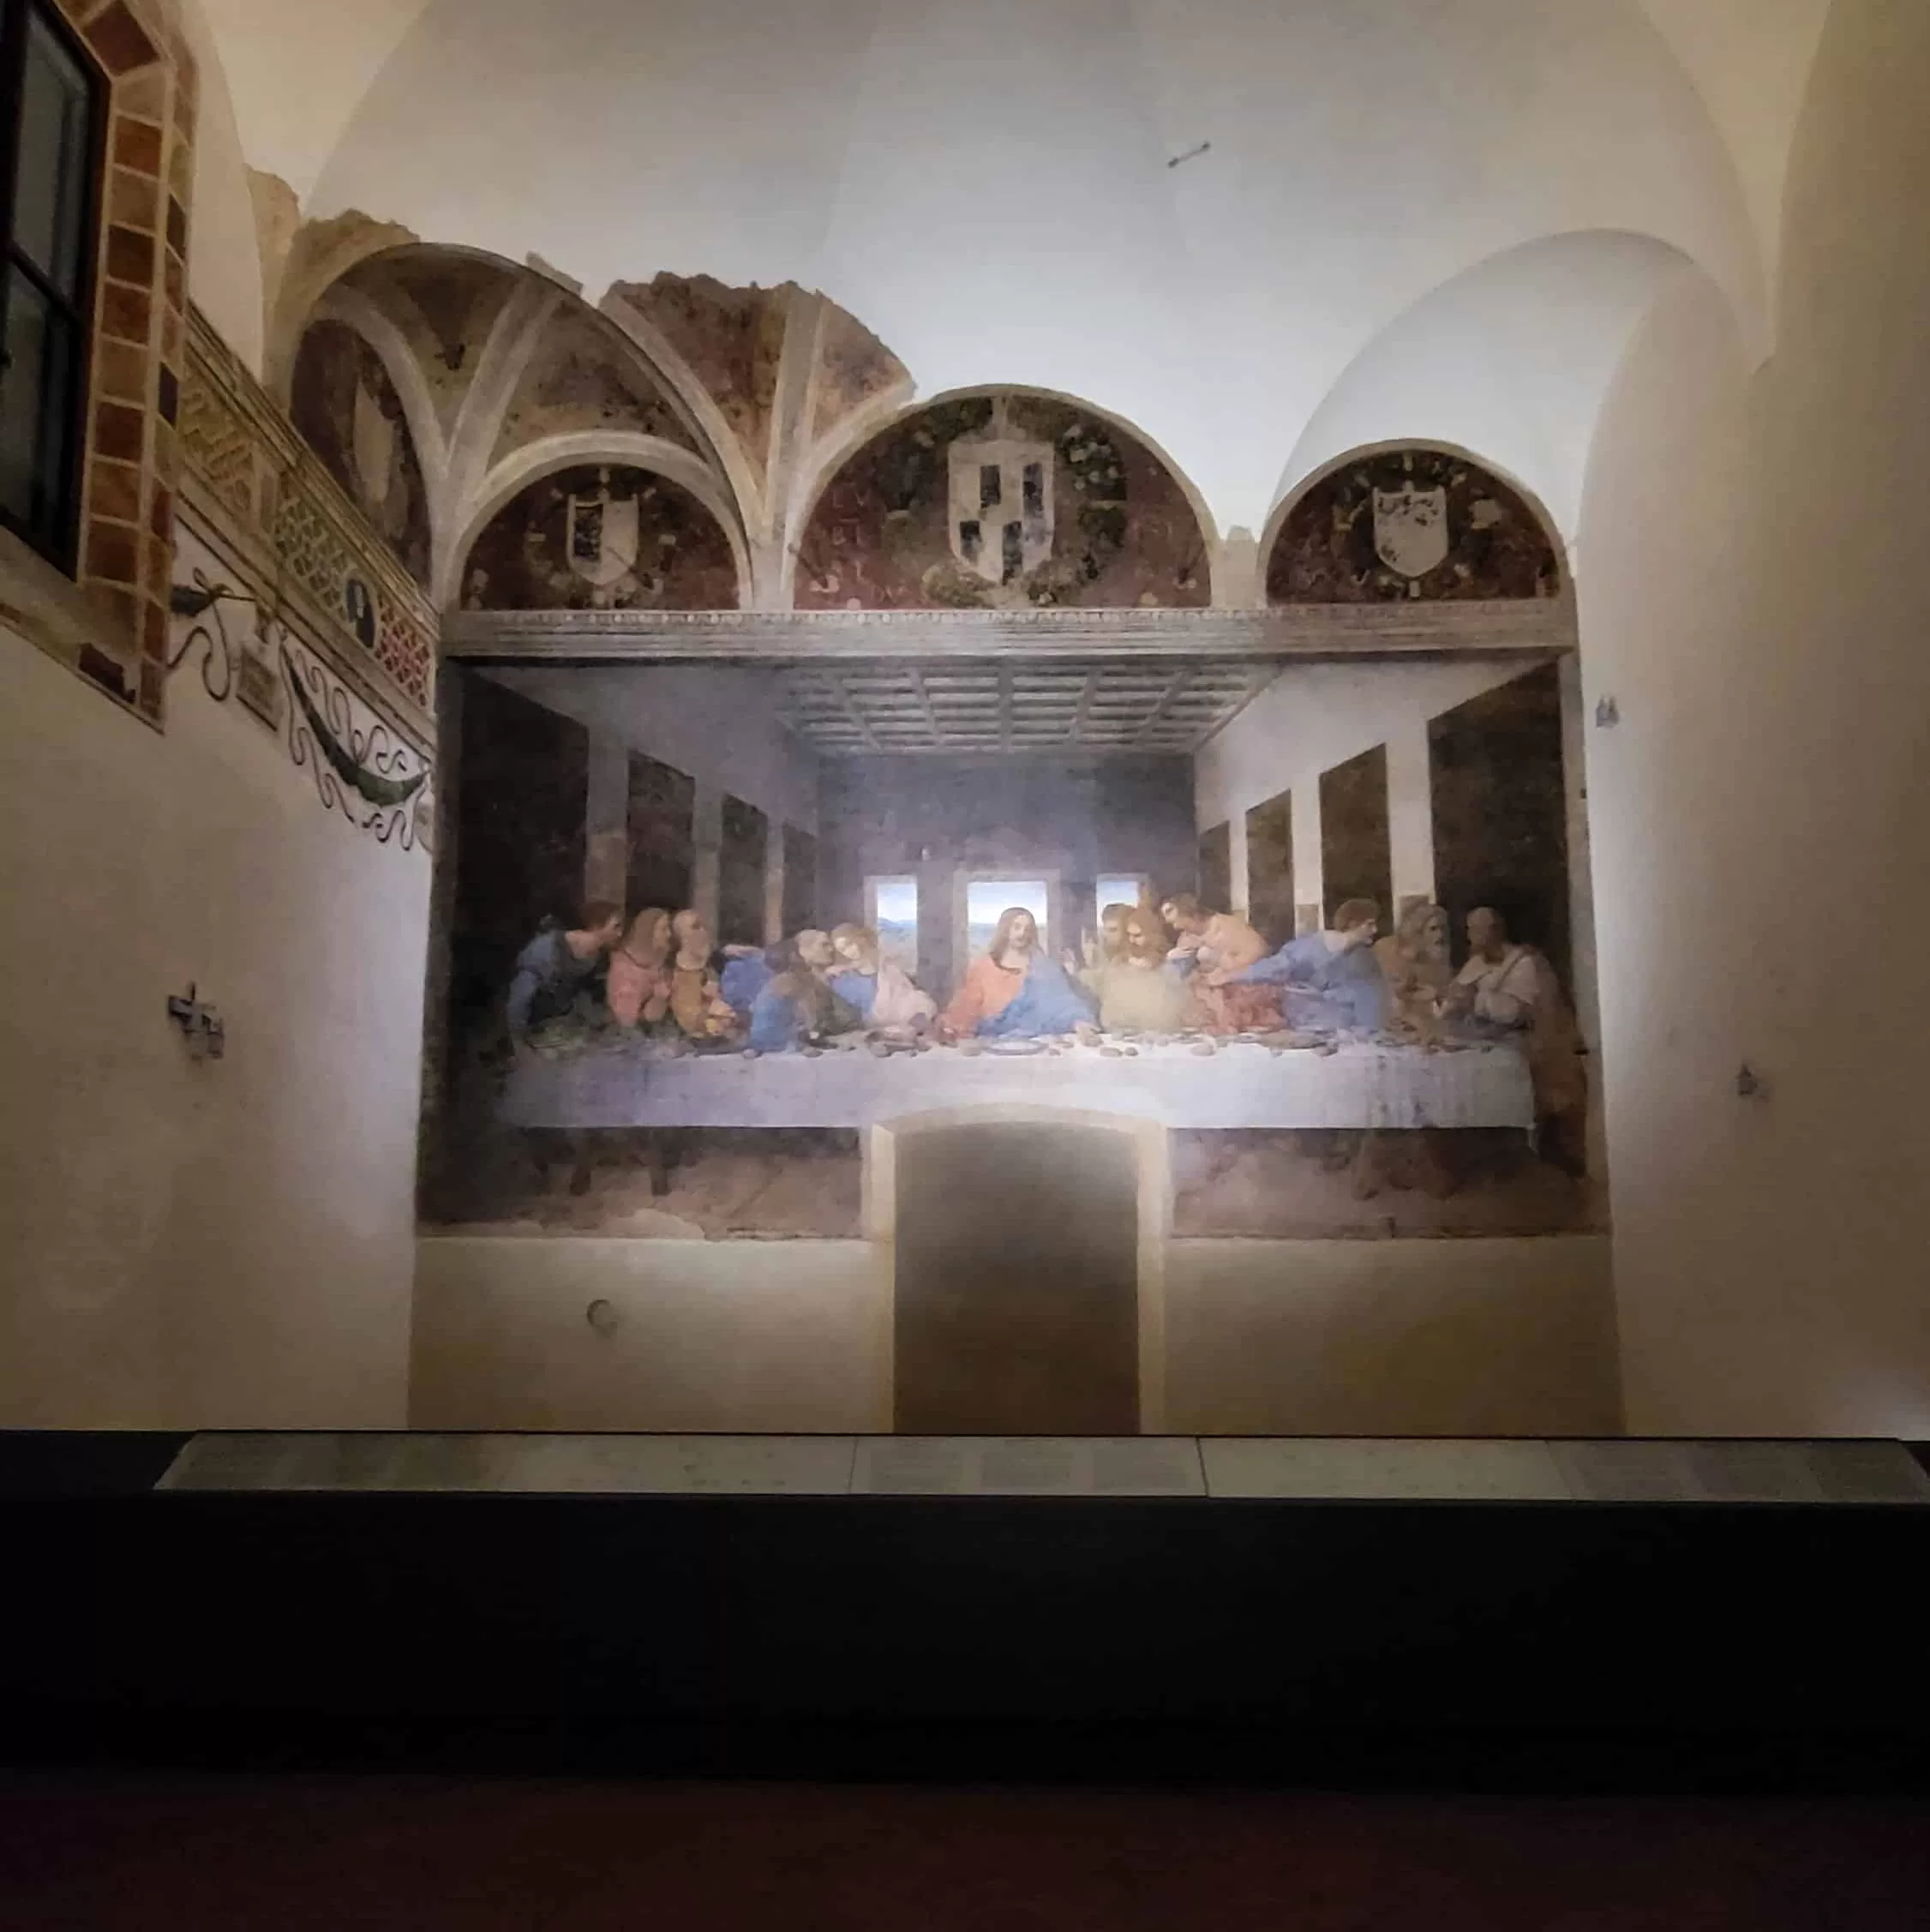 Da Vinci's Last Supper painting, an attraction that's part of the solo travel in Milan itinerary